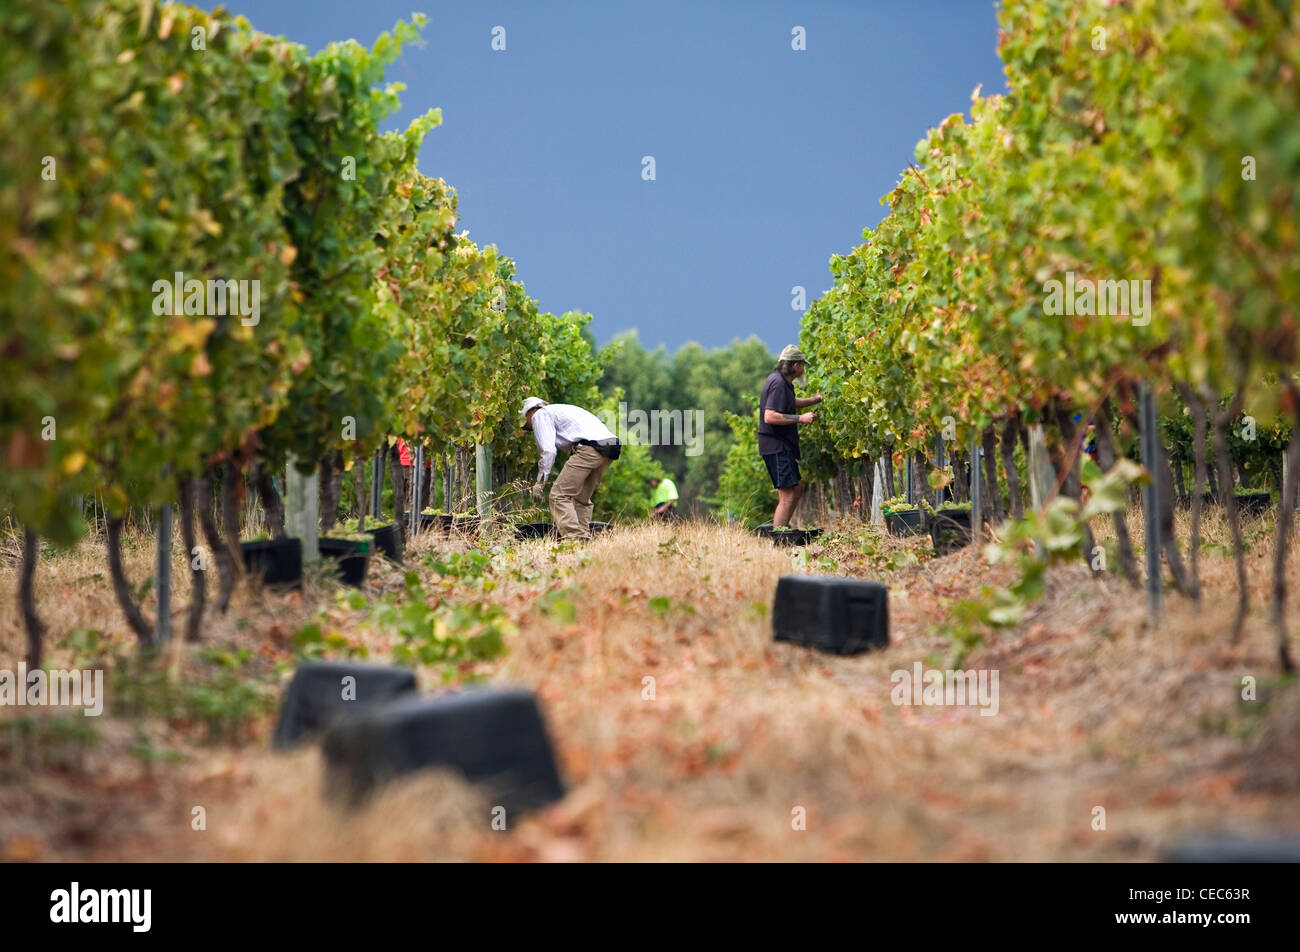 Workers harvest grapes by hand in a vineyard.  Margaret River, Western Australia, AUSTRALIA Stock Photo